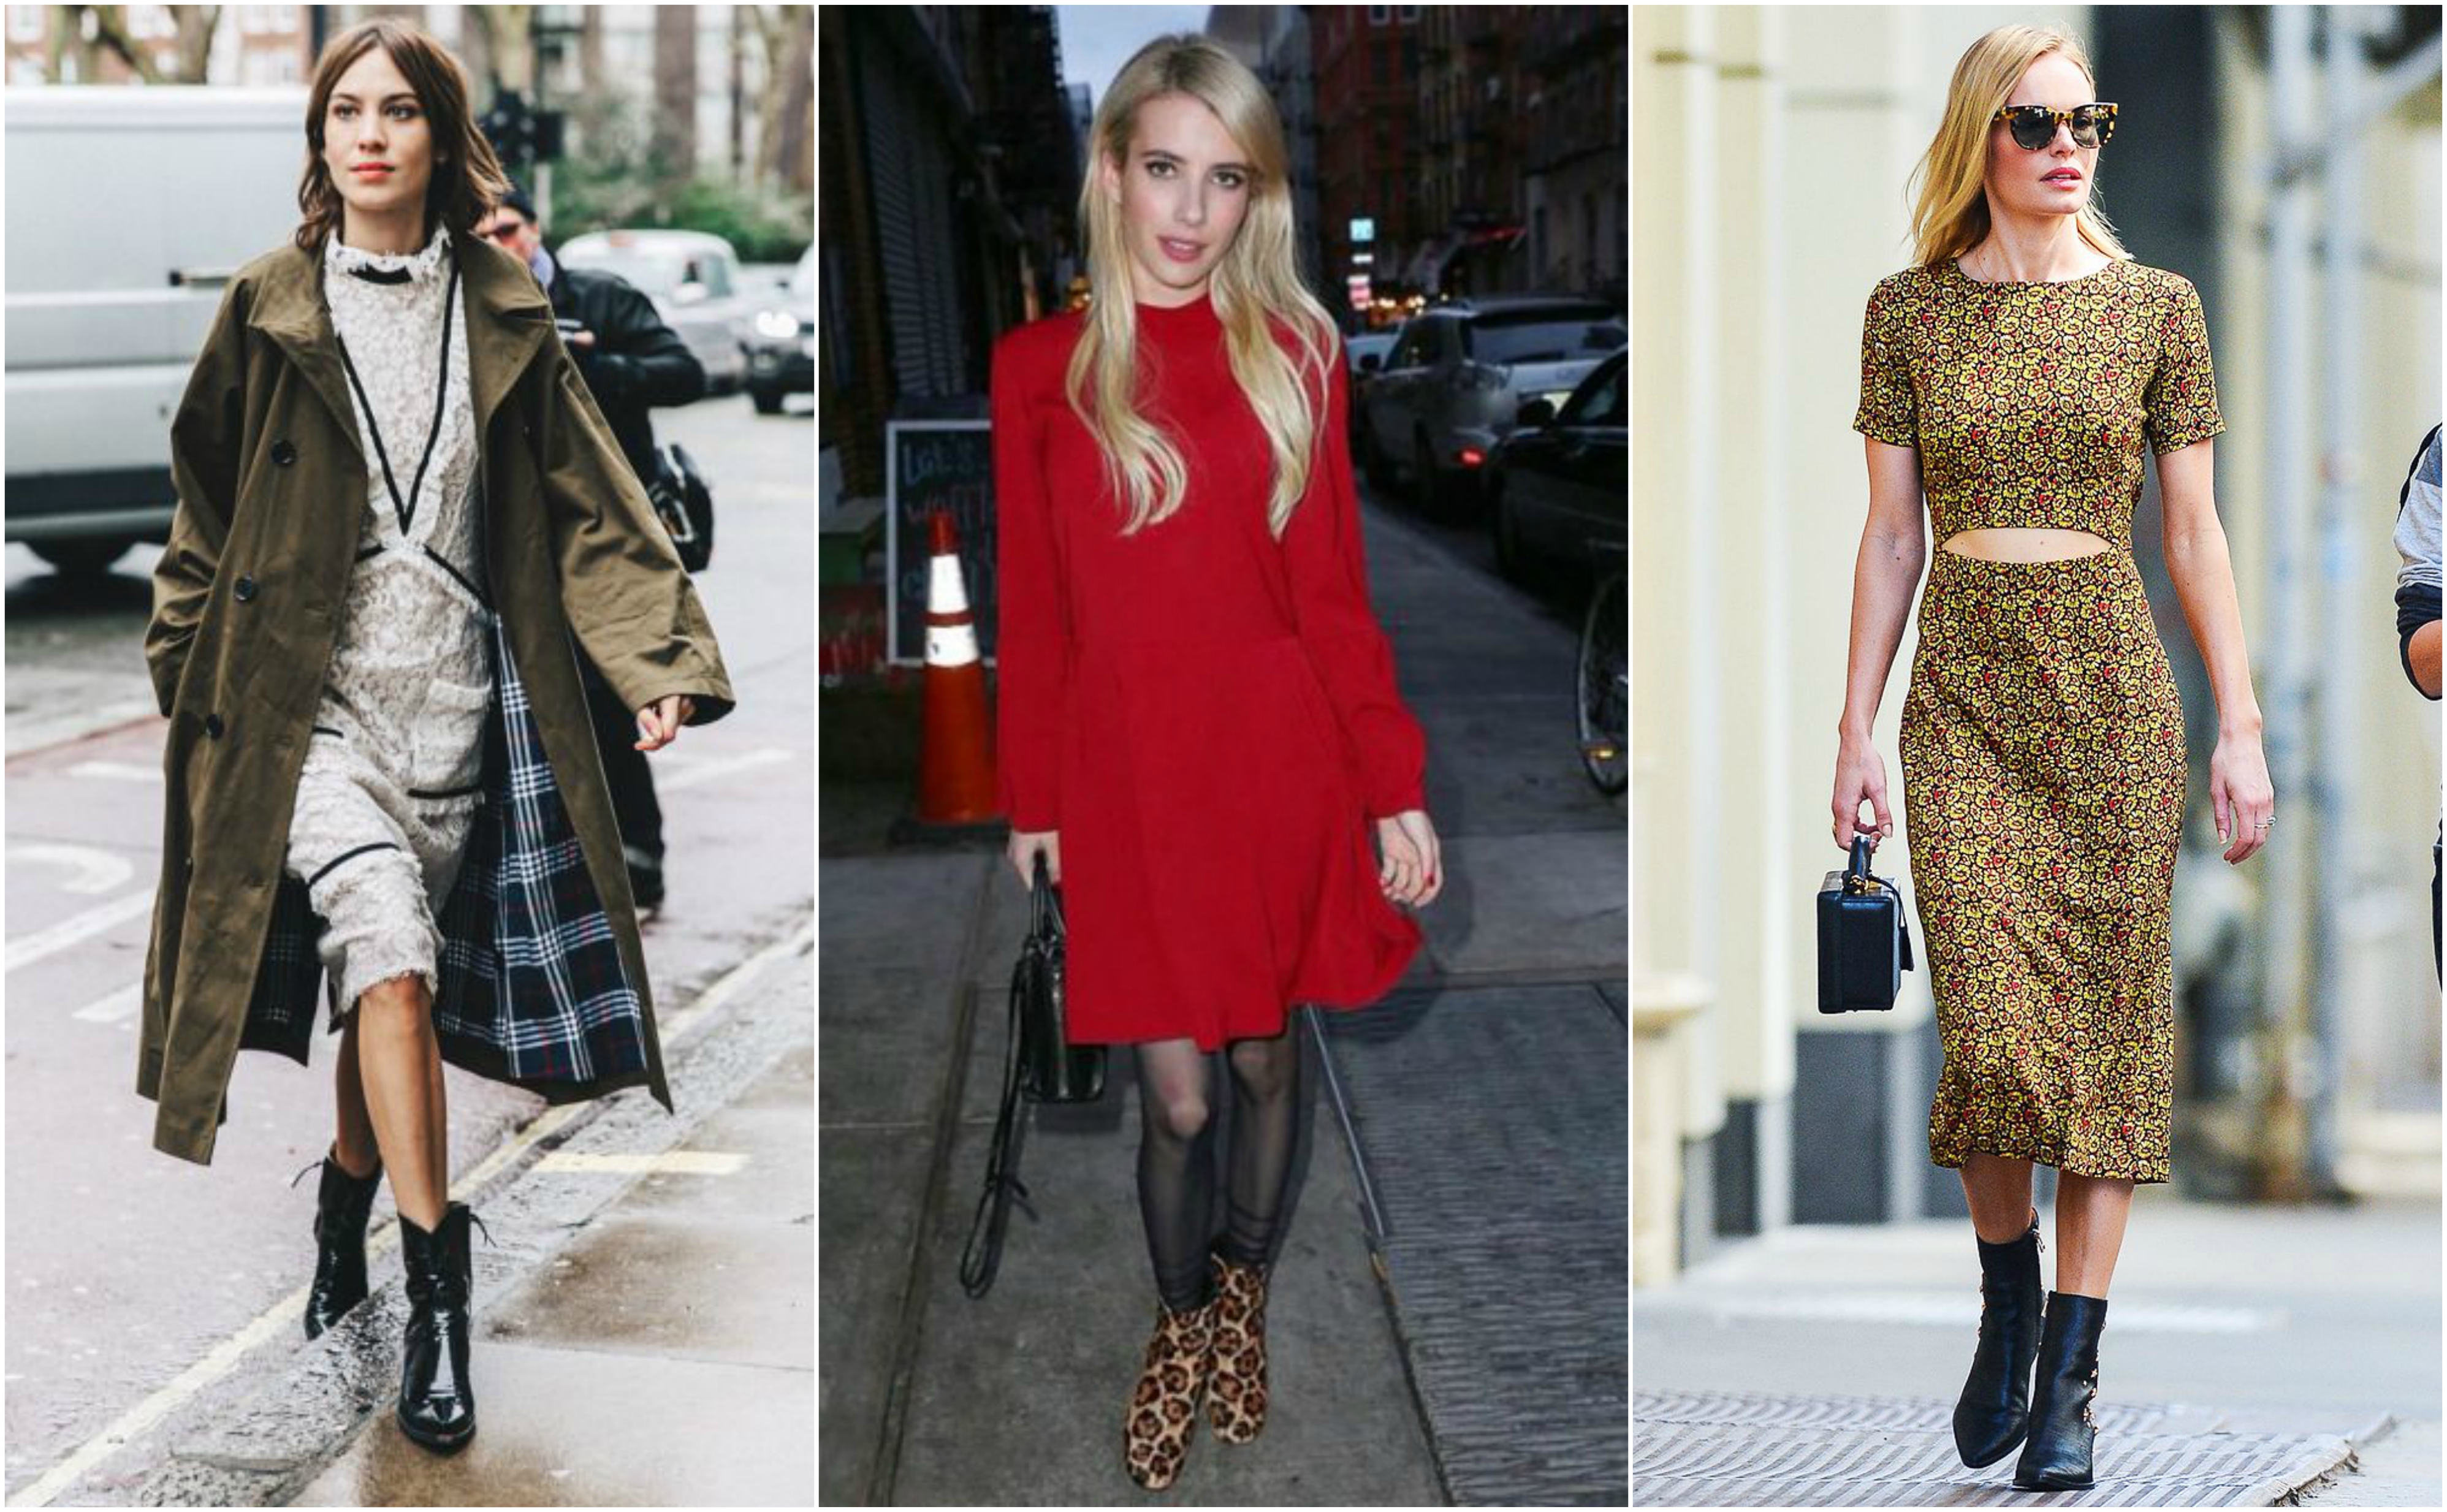 Celebrities in Chelsea boots and winter dresses: Alexa Chung, Emma Roberts, Kate Bosworth